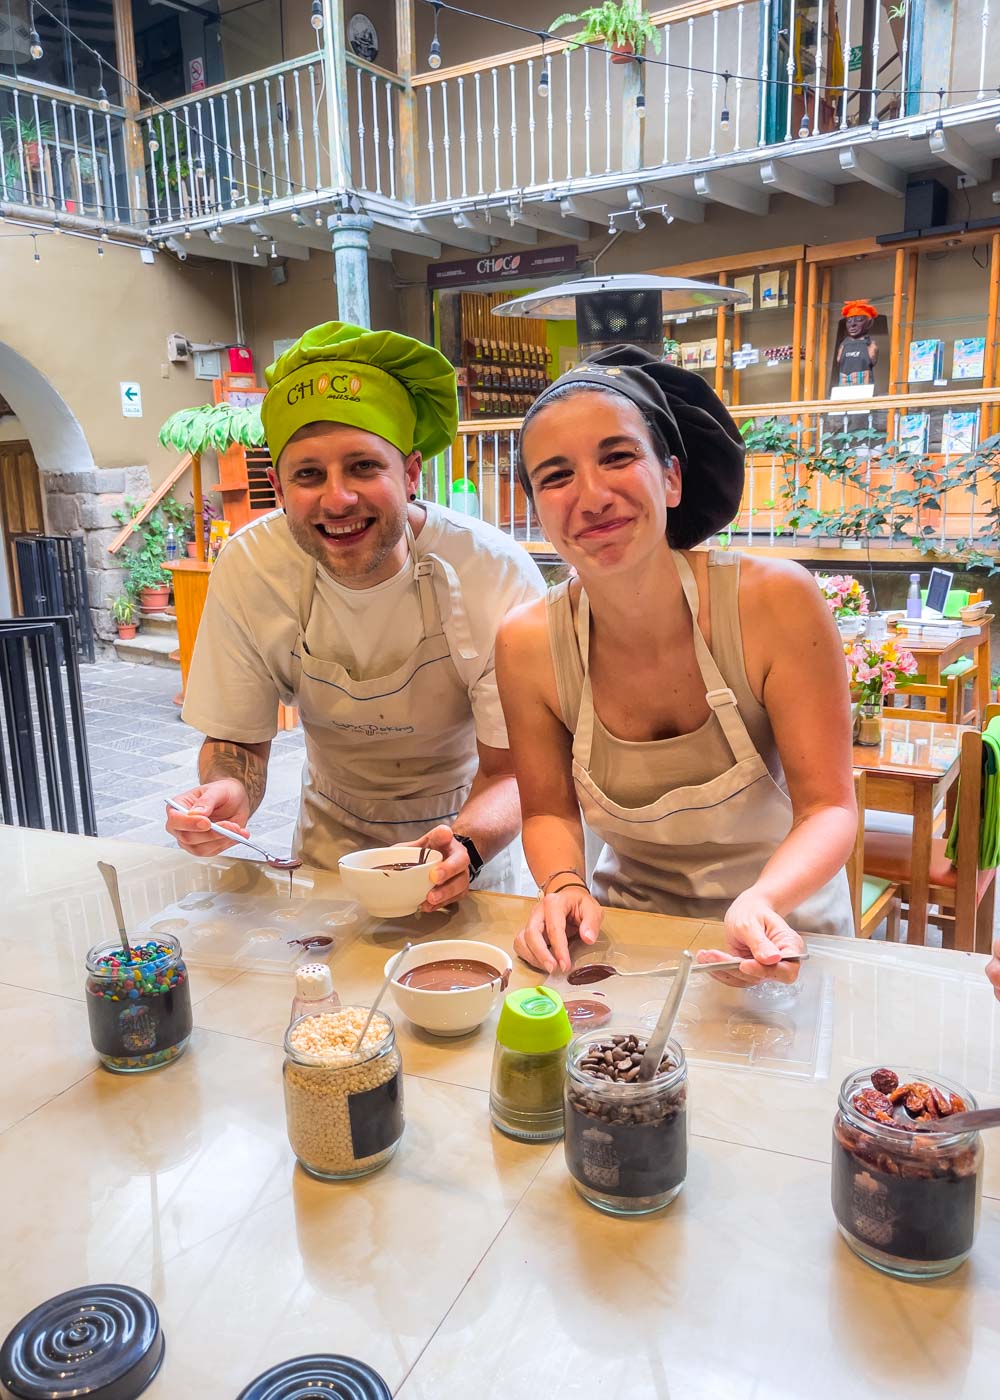 Ryan and Sara dressed in chef hats and aproms while smiling at the camera while filling molds with chocolate during a workshop at the ChocoMuseo in Cusco.